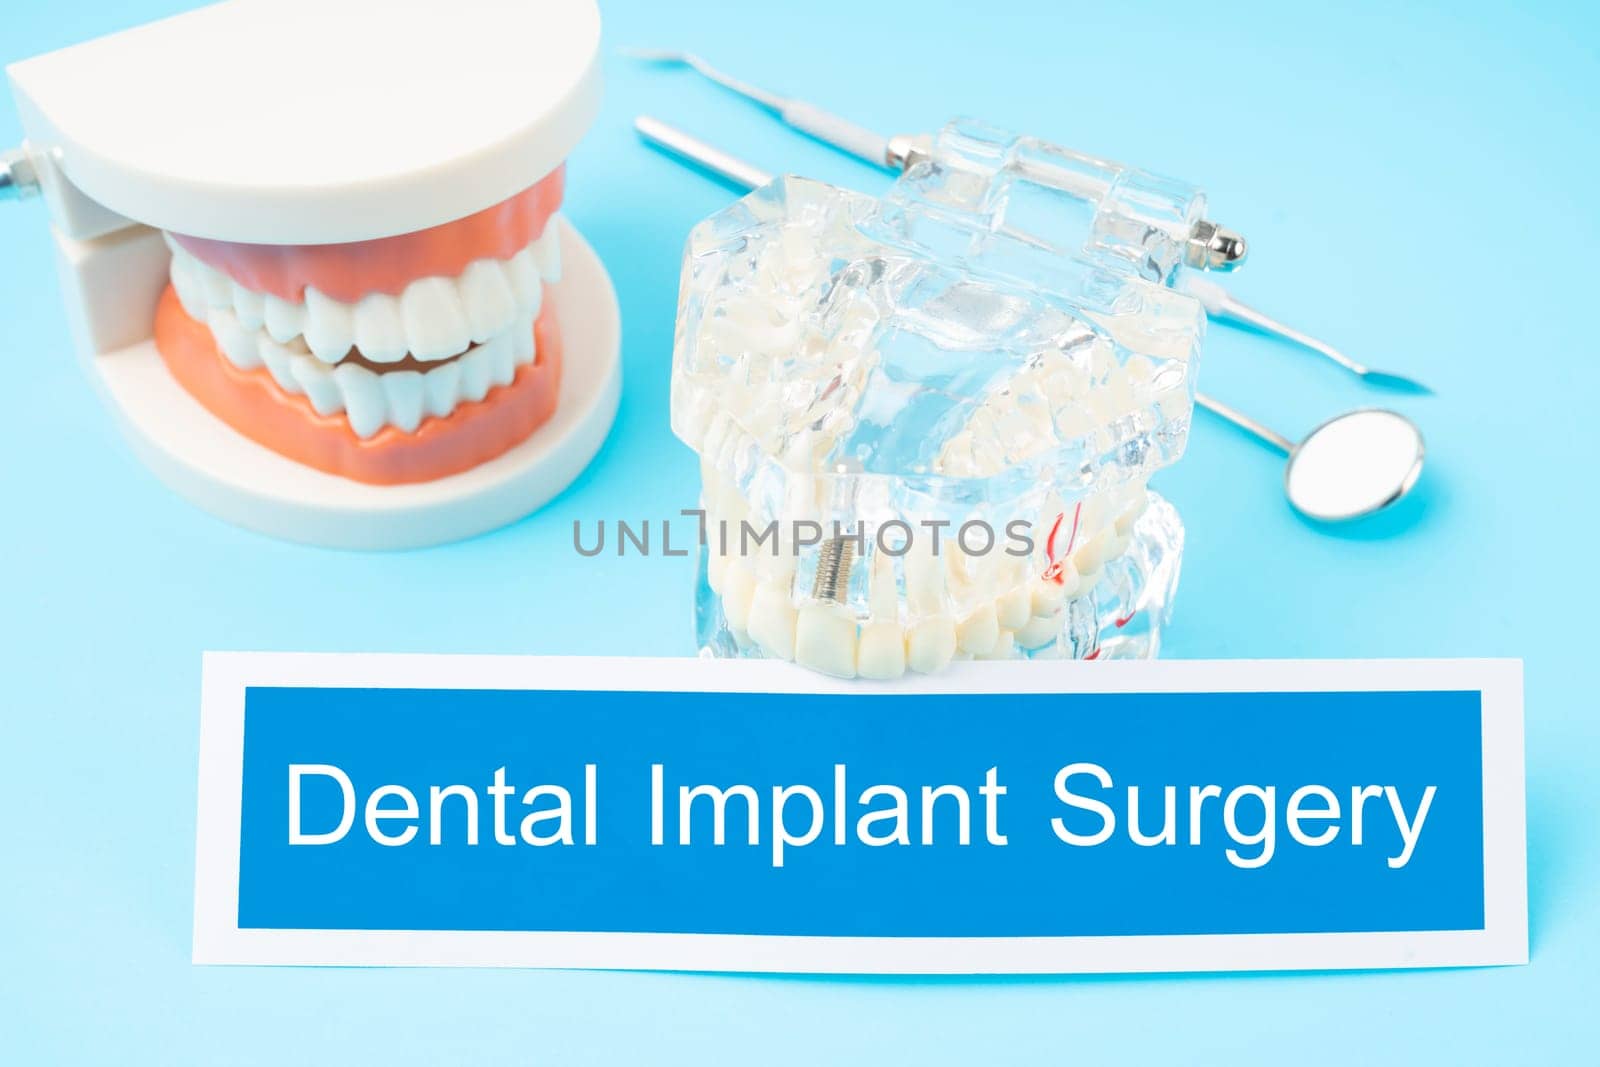 The Teeth model and dental tools on blue background, Dental implant surgery concepts by Gamjai